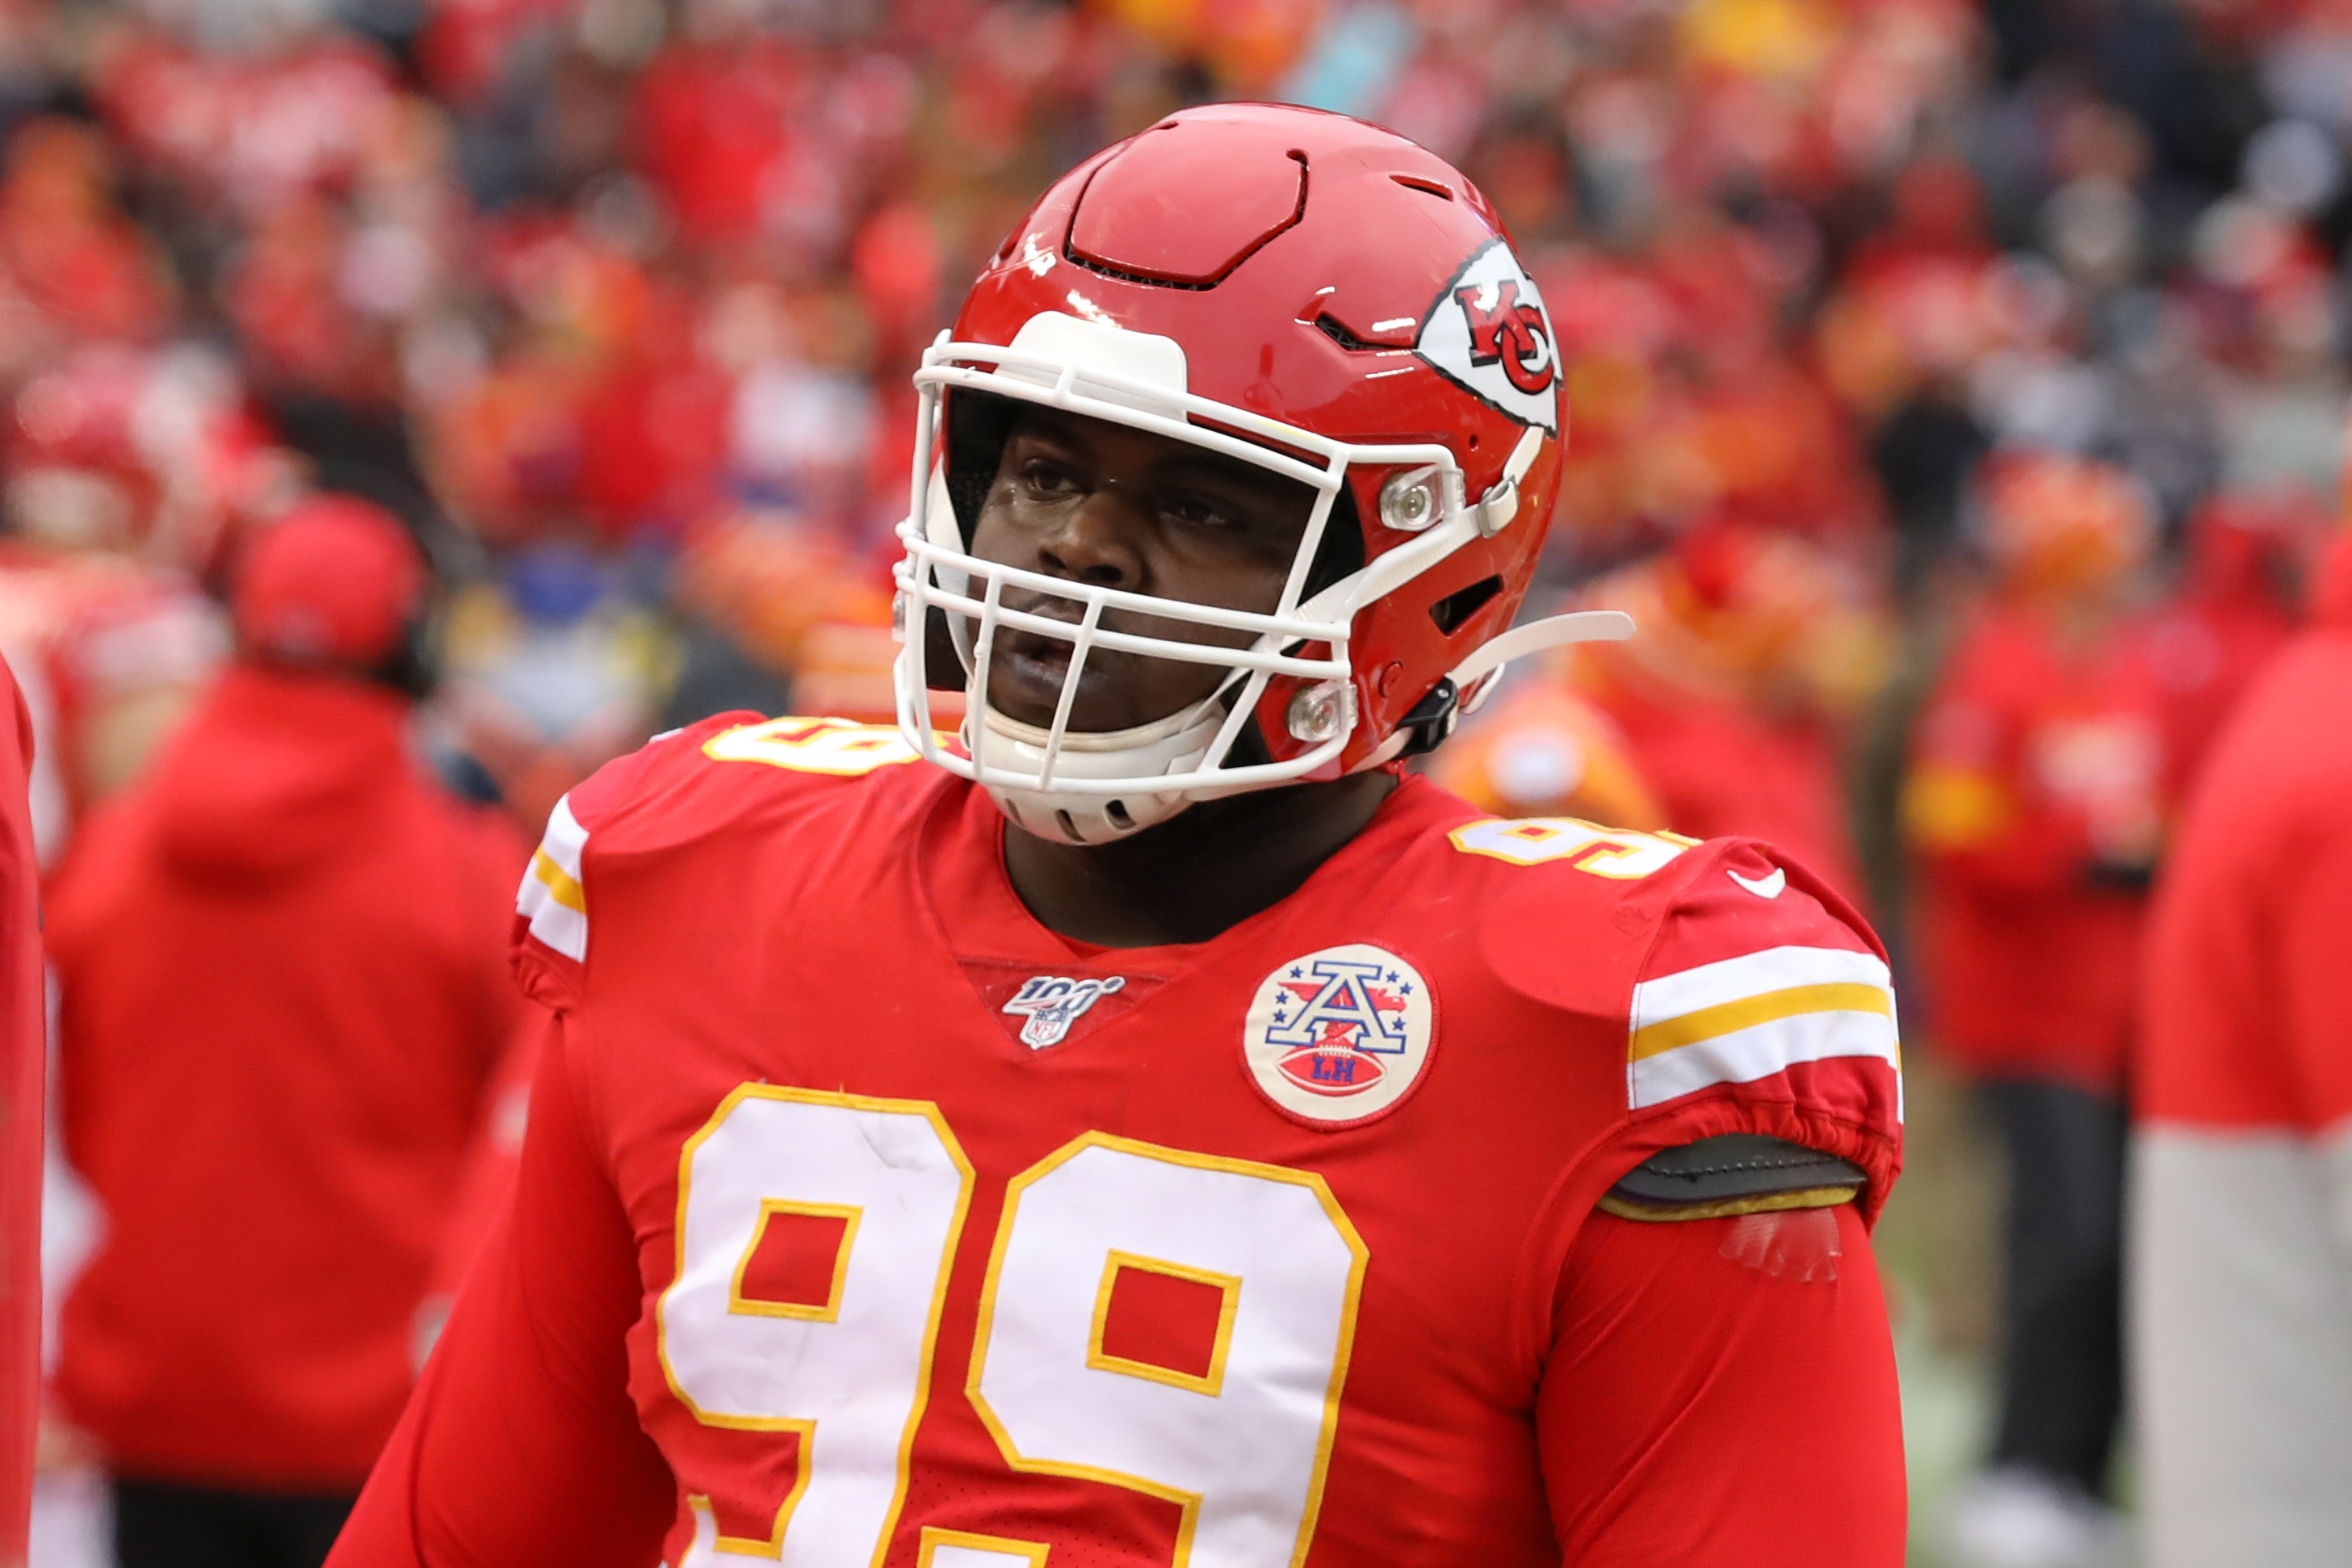 NFL: DEC 29 Chargers at Chiefs